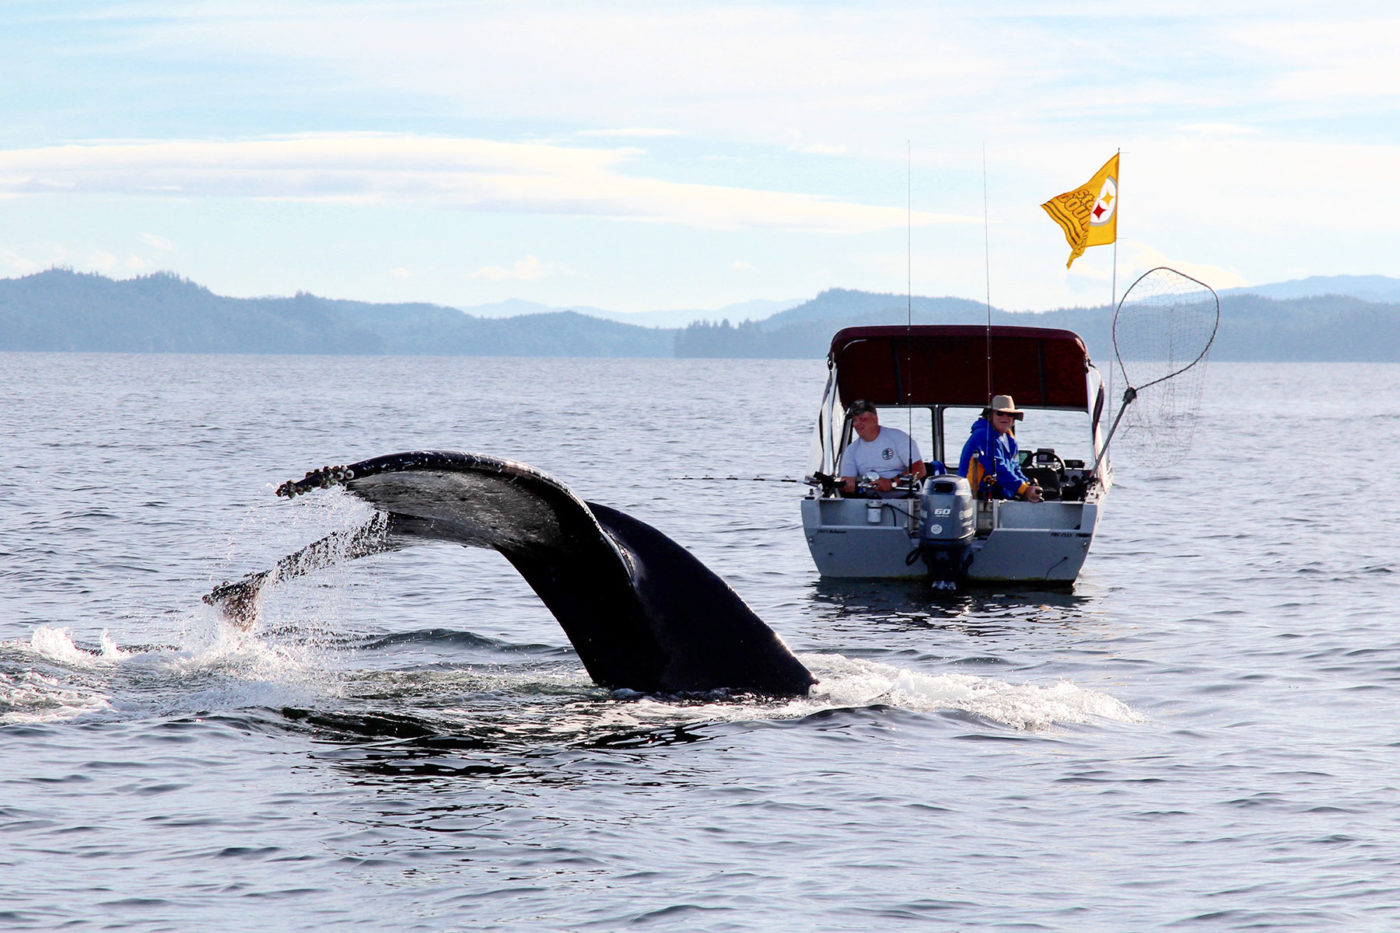 Humpback whale breaches right next to a fishing boat.